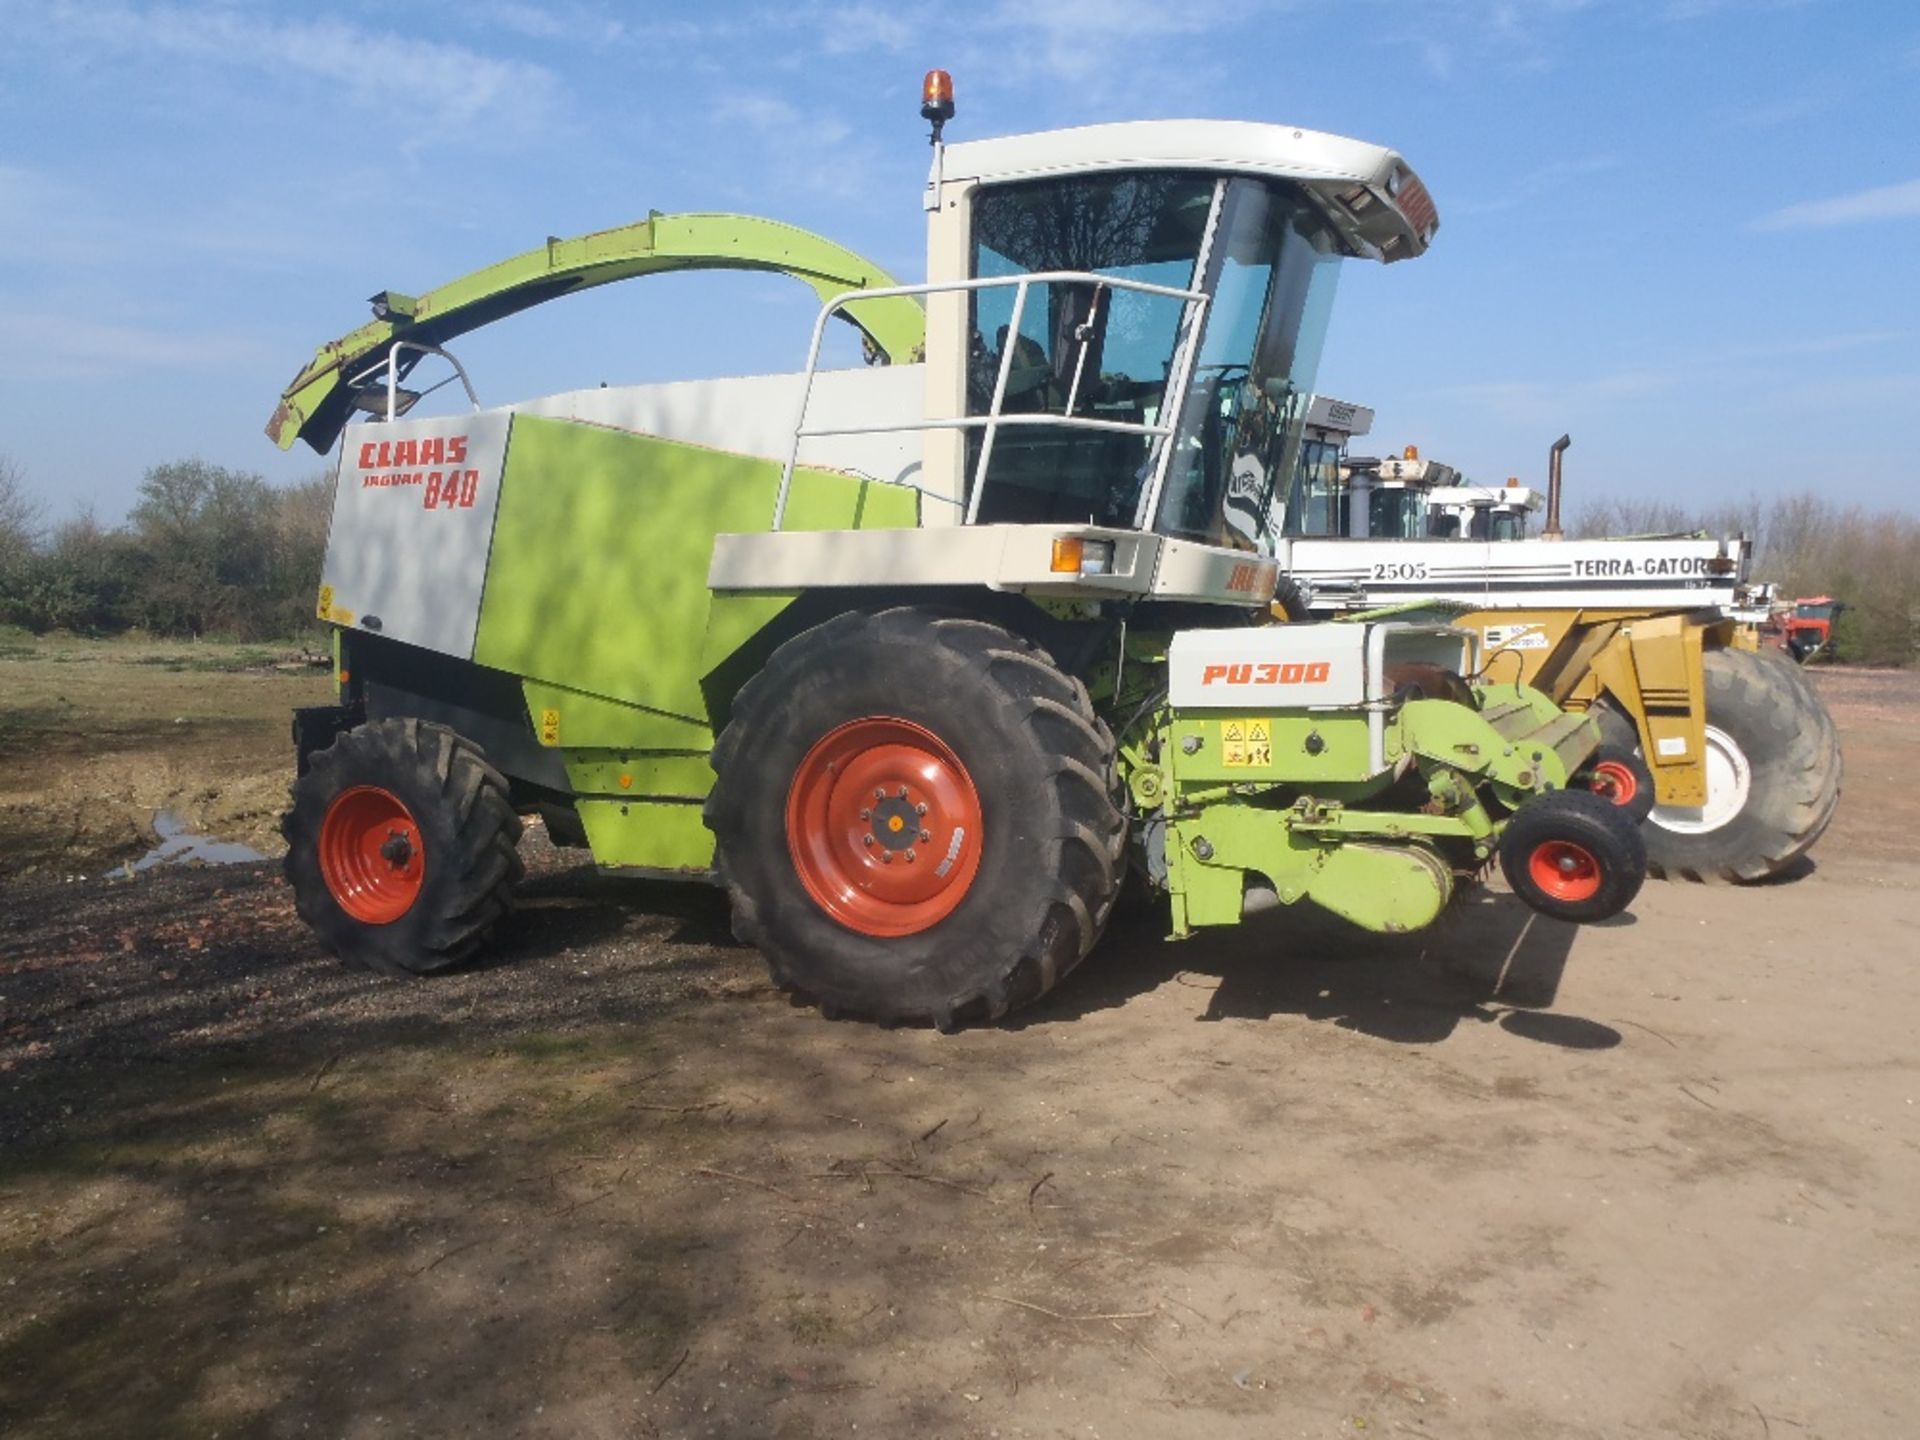 Claas Jaguar 840 Forage Harvester with 3m Grass Pick Up. Reg.No. T336 UOS - Image 4 of 7